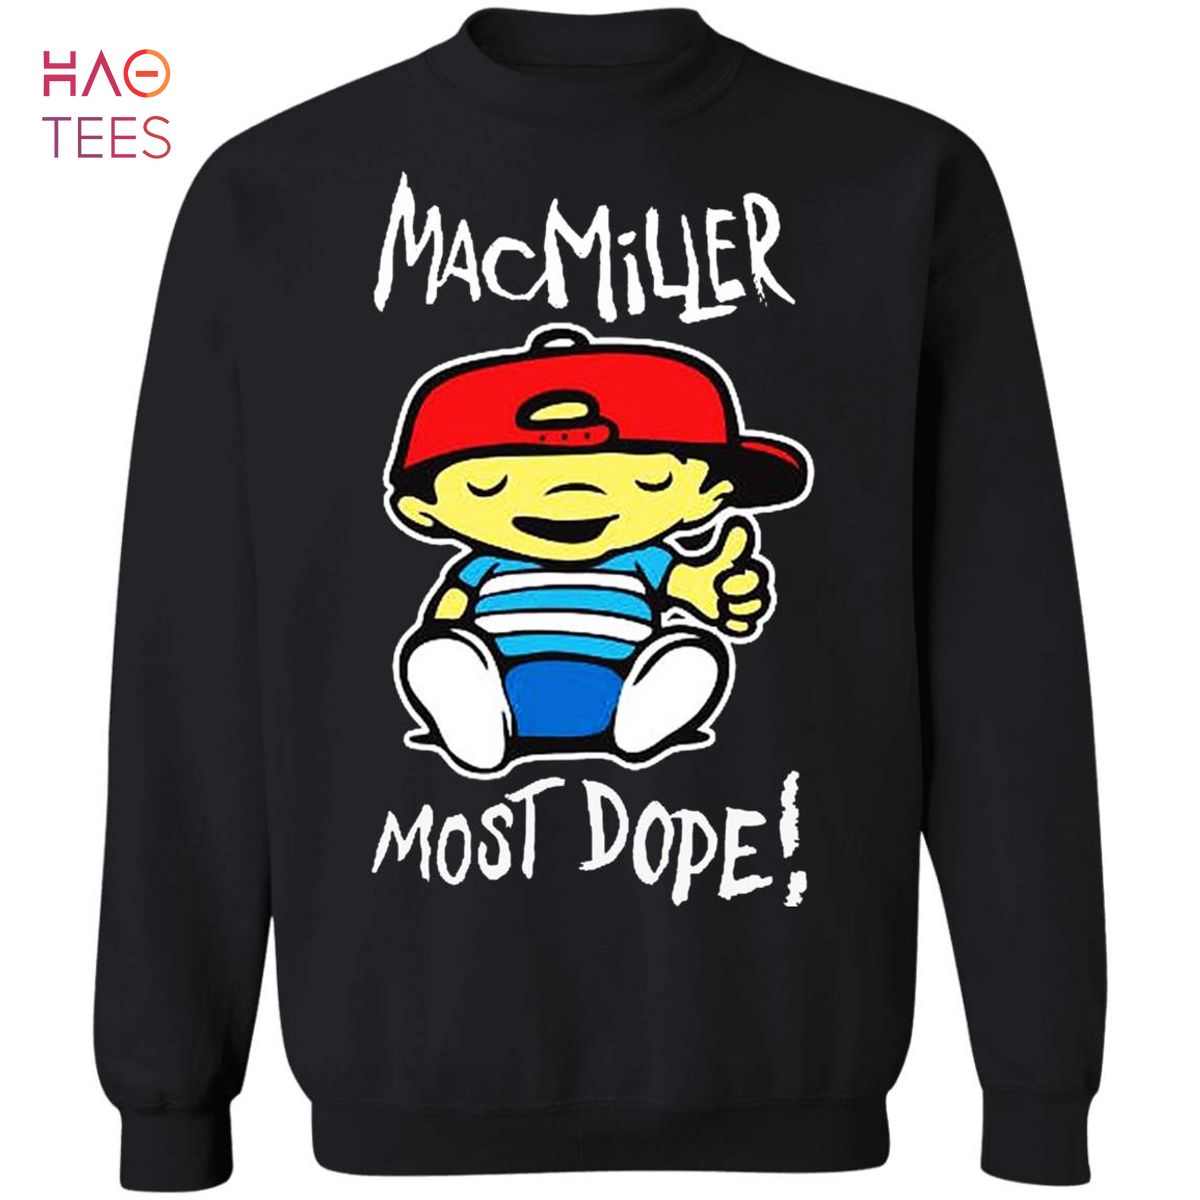 [NEW] Mac Miller Most Dope Sweater